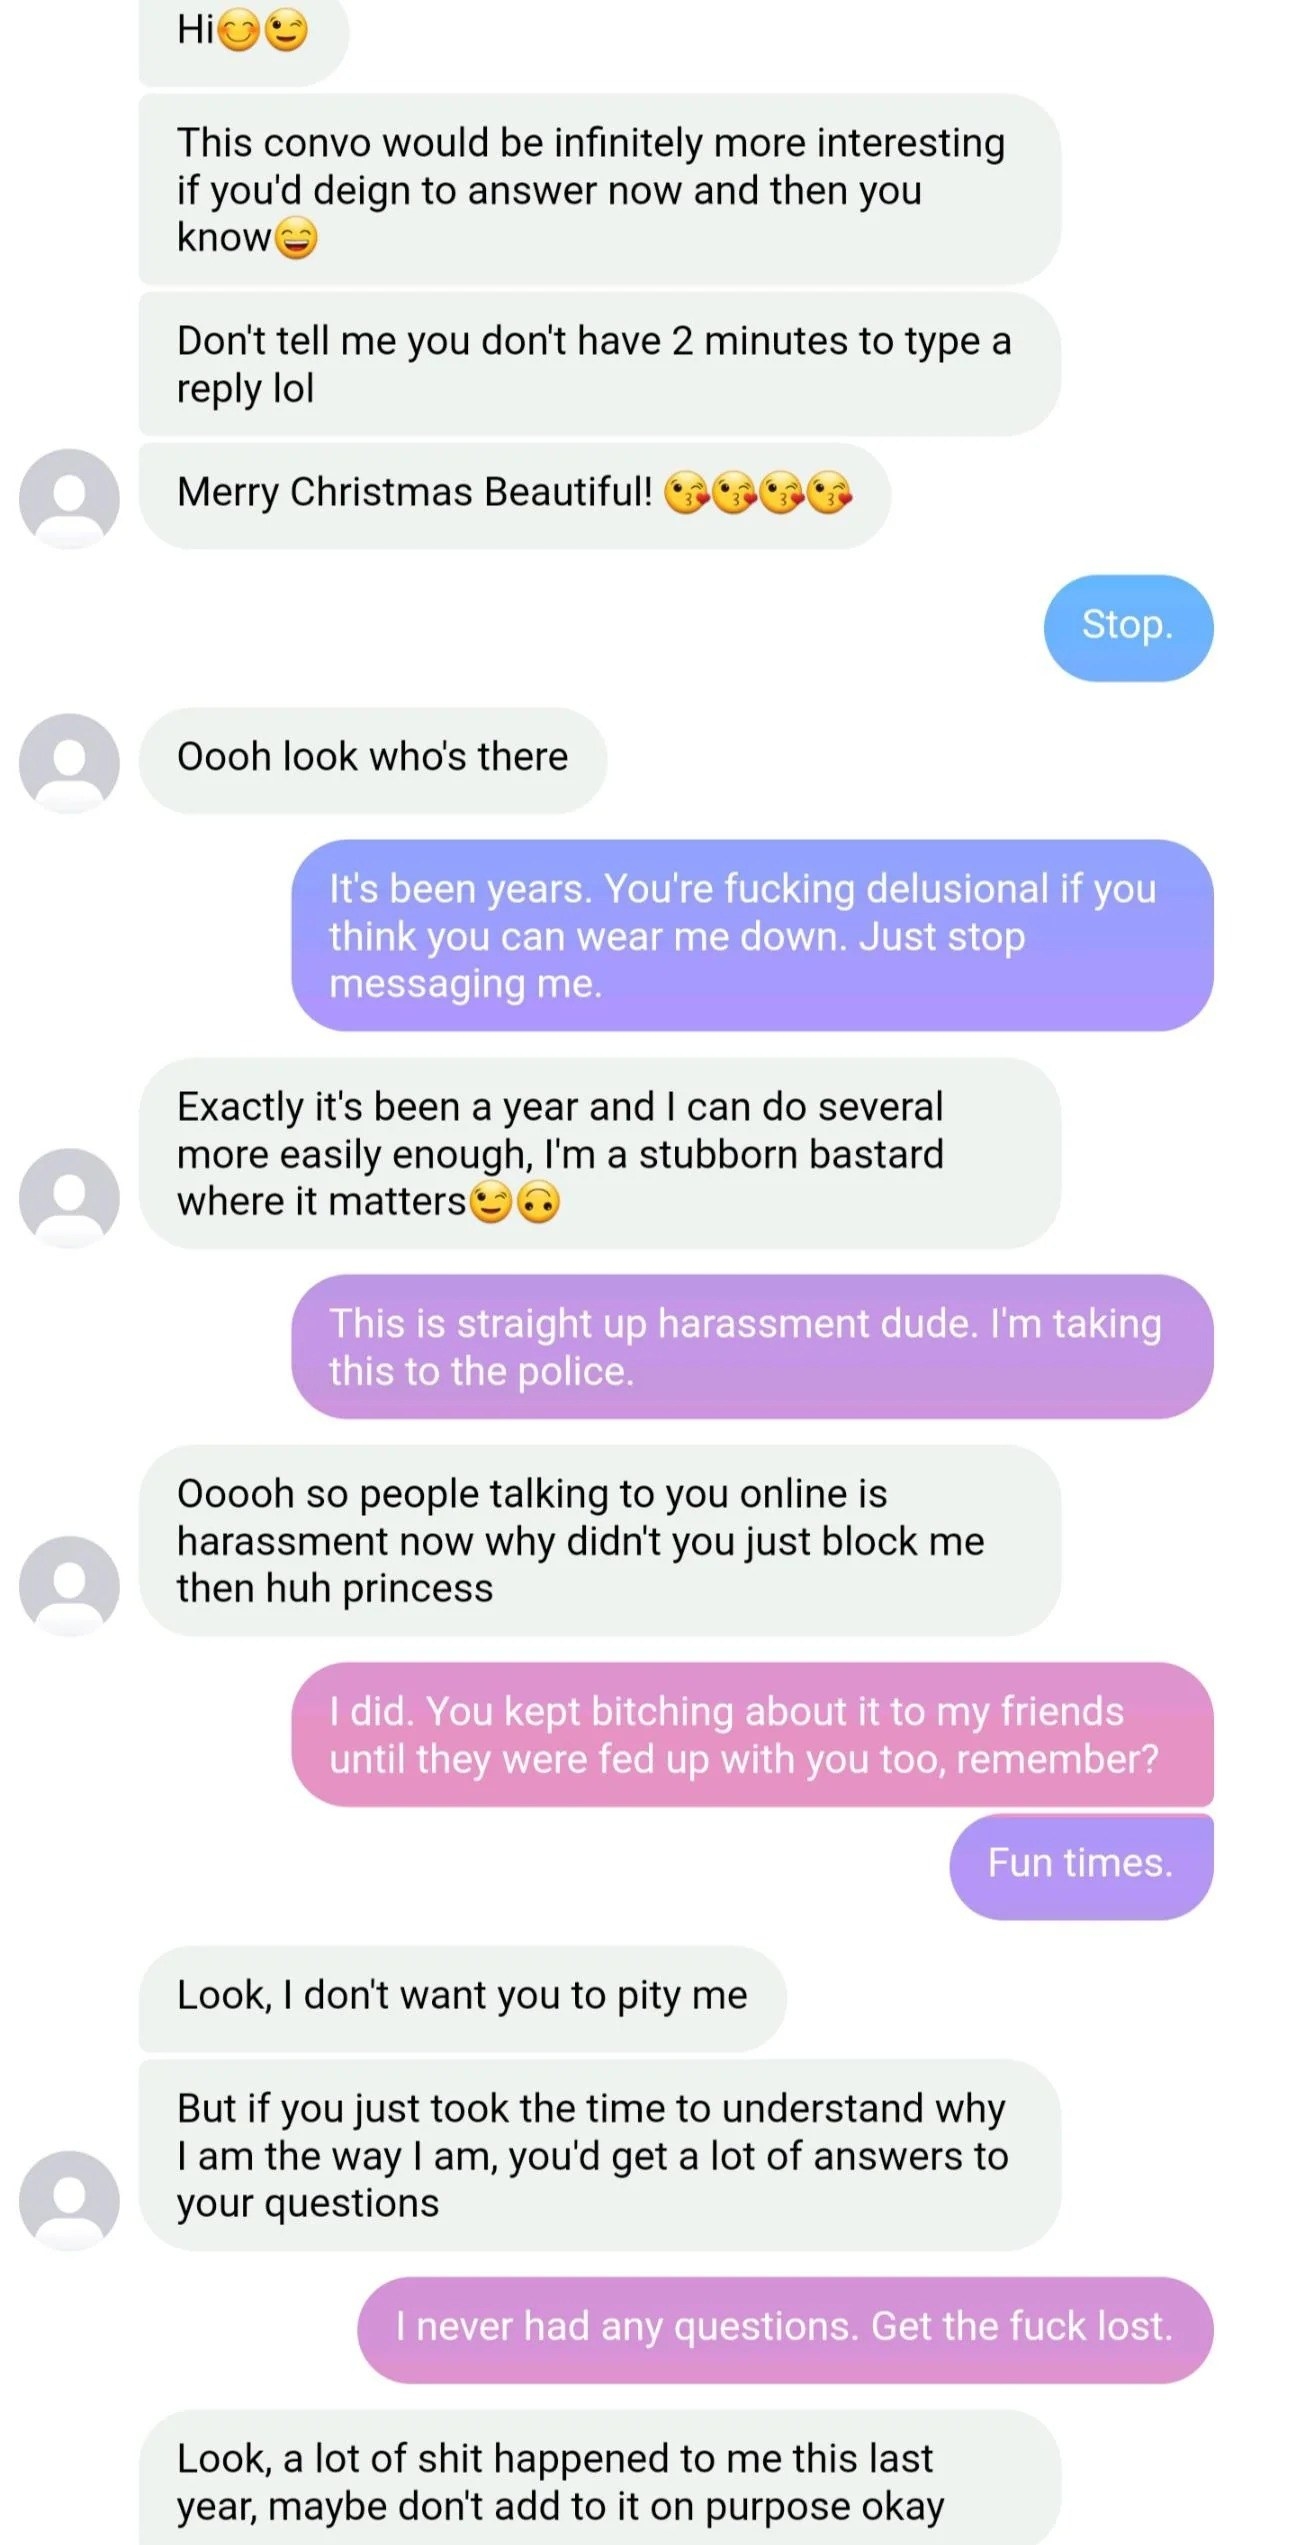 An endless text exchange in which he asks her to take the time to understand him, even after she says he&#x27;s harassing her